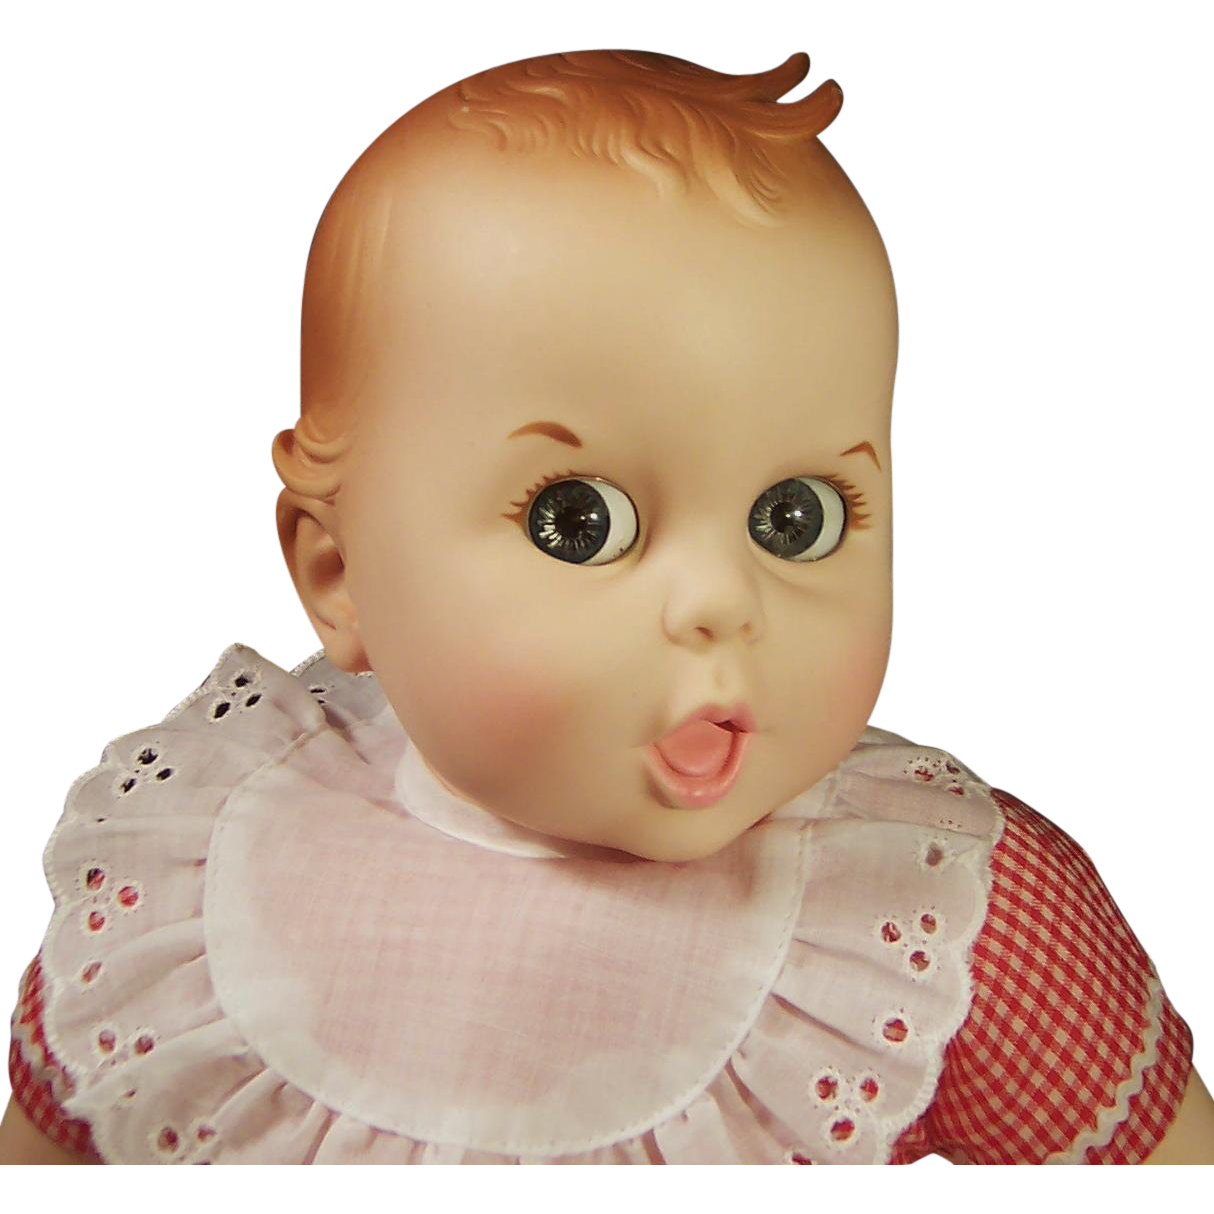 Vintage Girl Doll PNG HD Quality